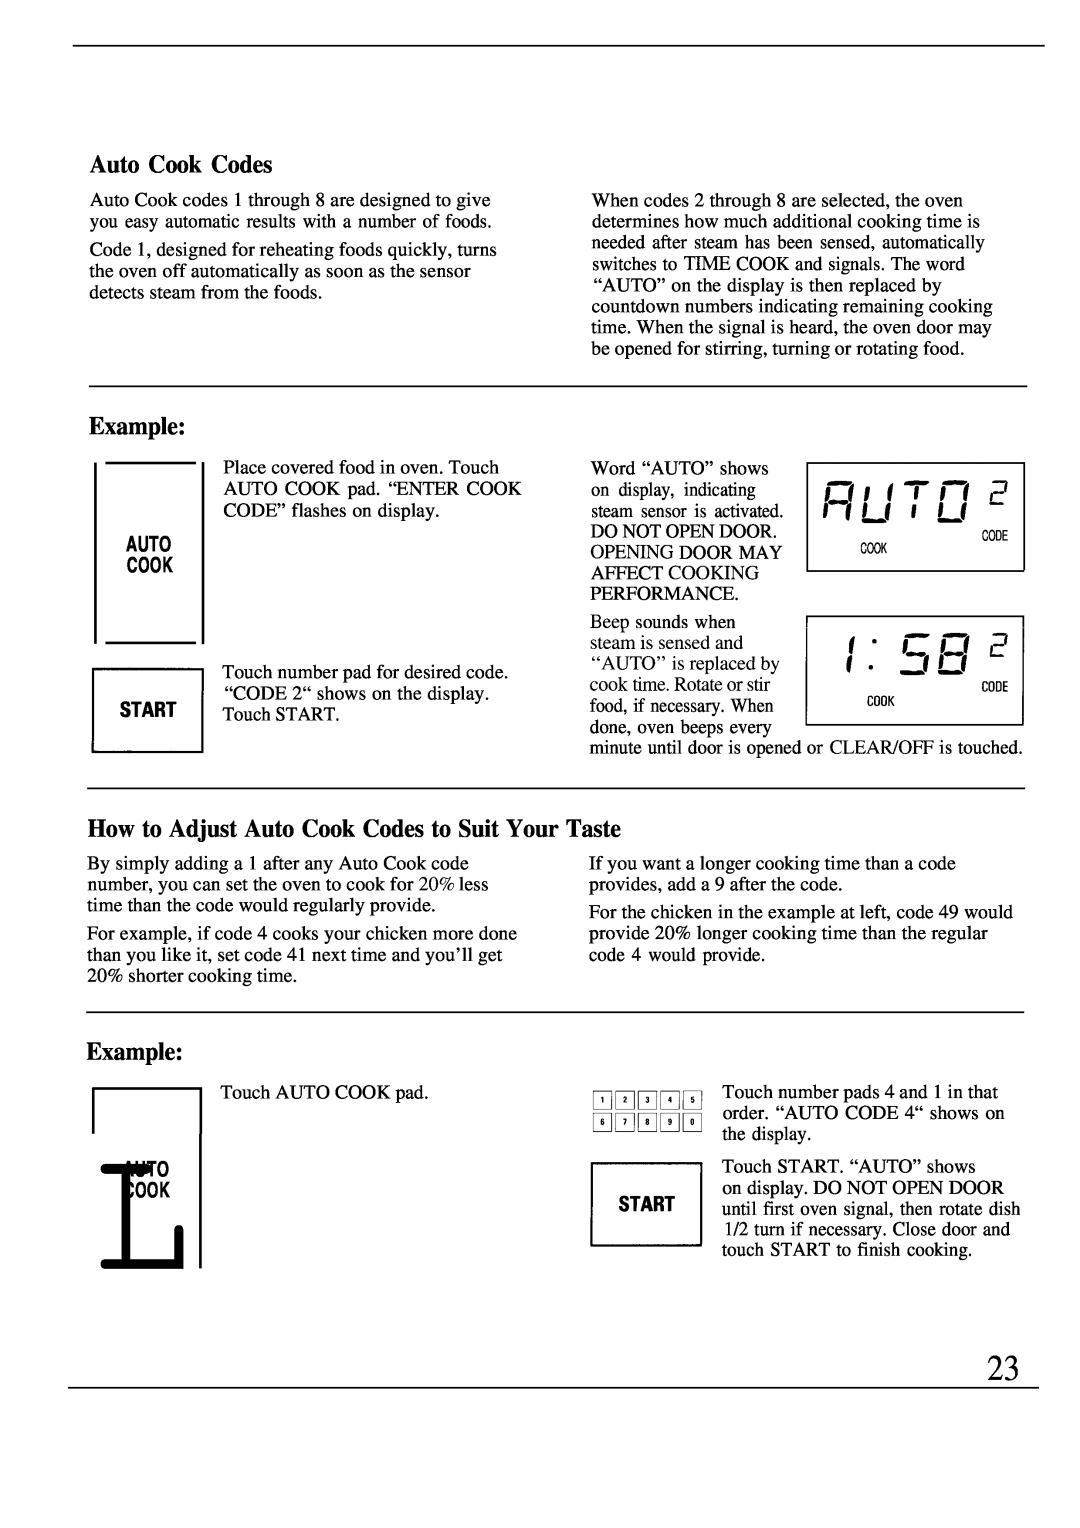 GE Monogram ZW2000 manual How to Adjust Auto Cook Codes to Suit Your Taste, Example, nSTART, Auto Lcook 